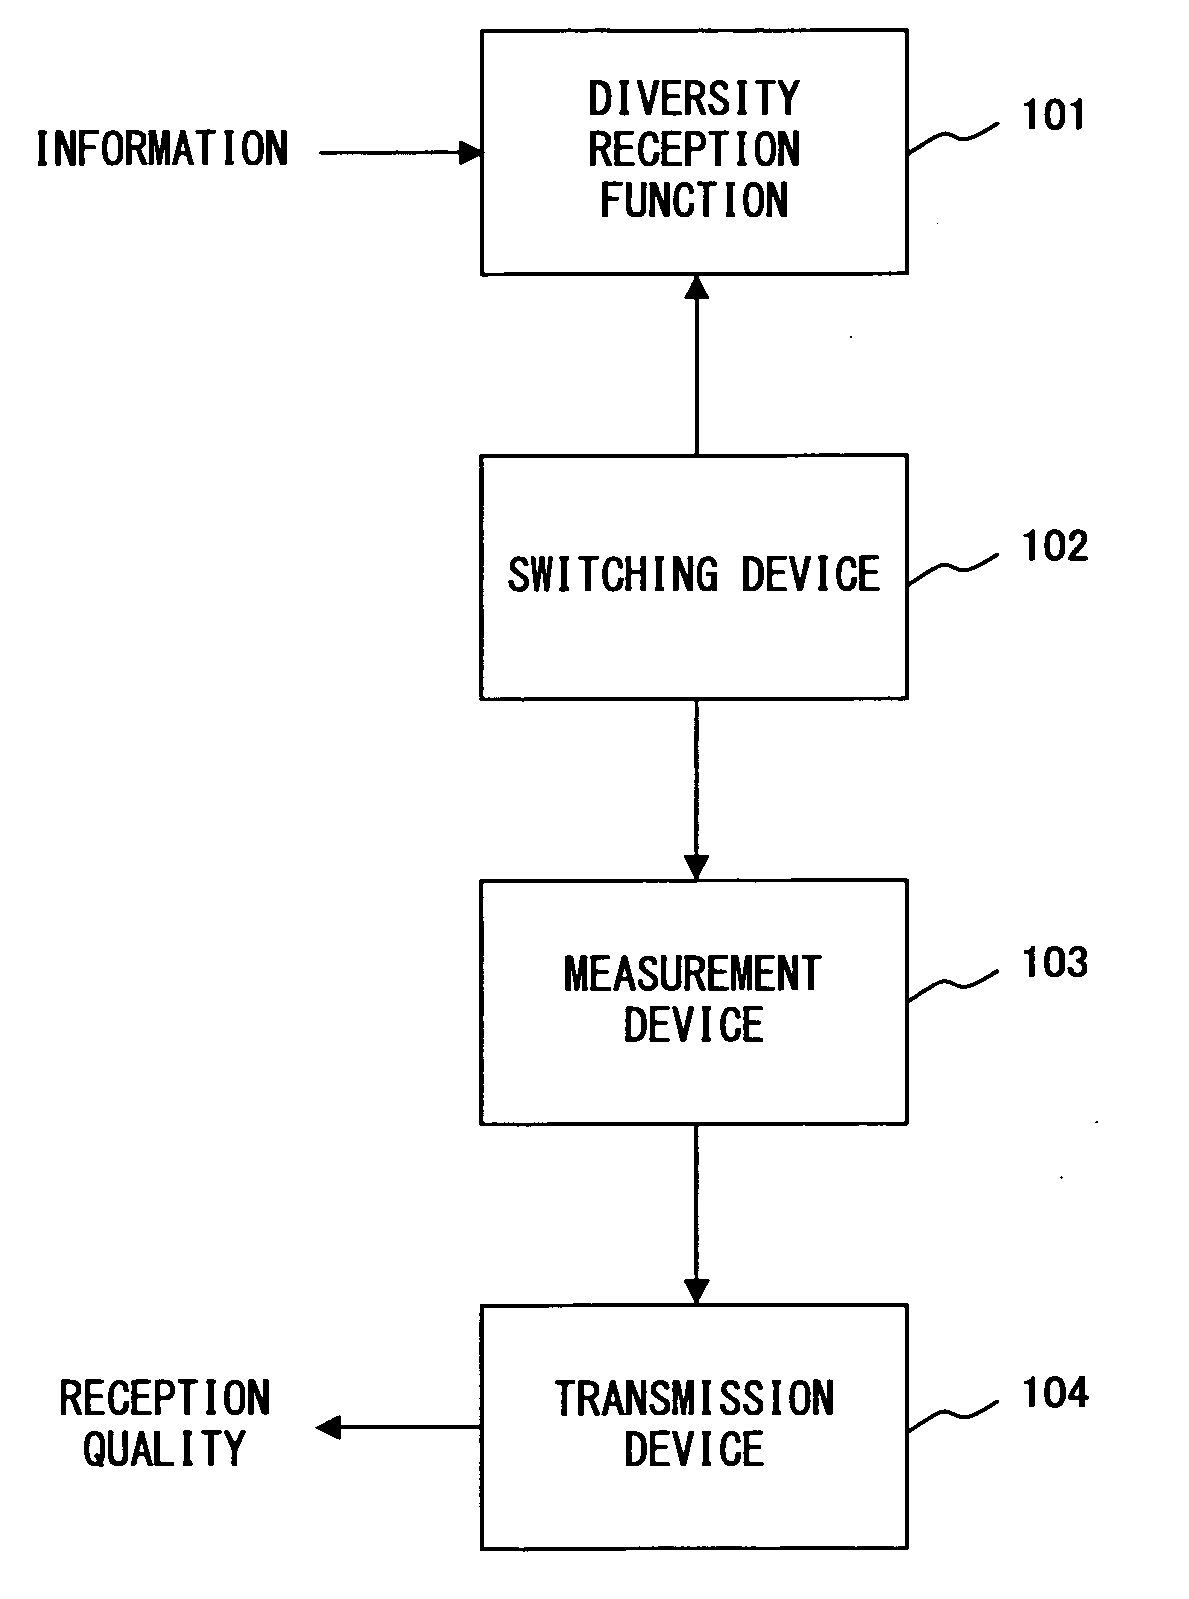 Communication apparatus and method for controlling diversity reception